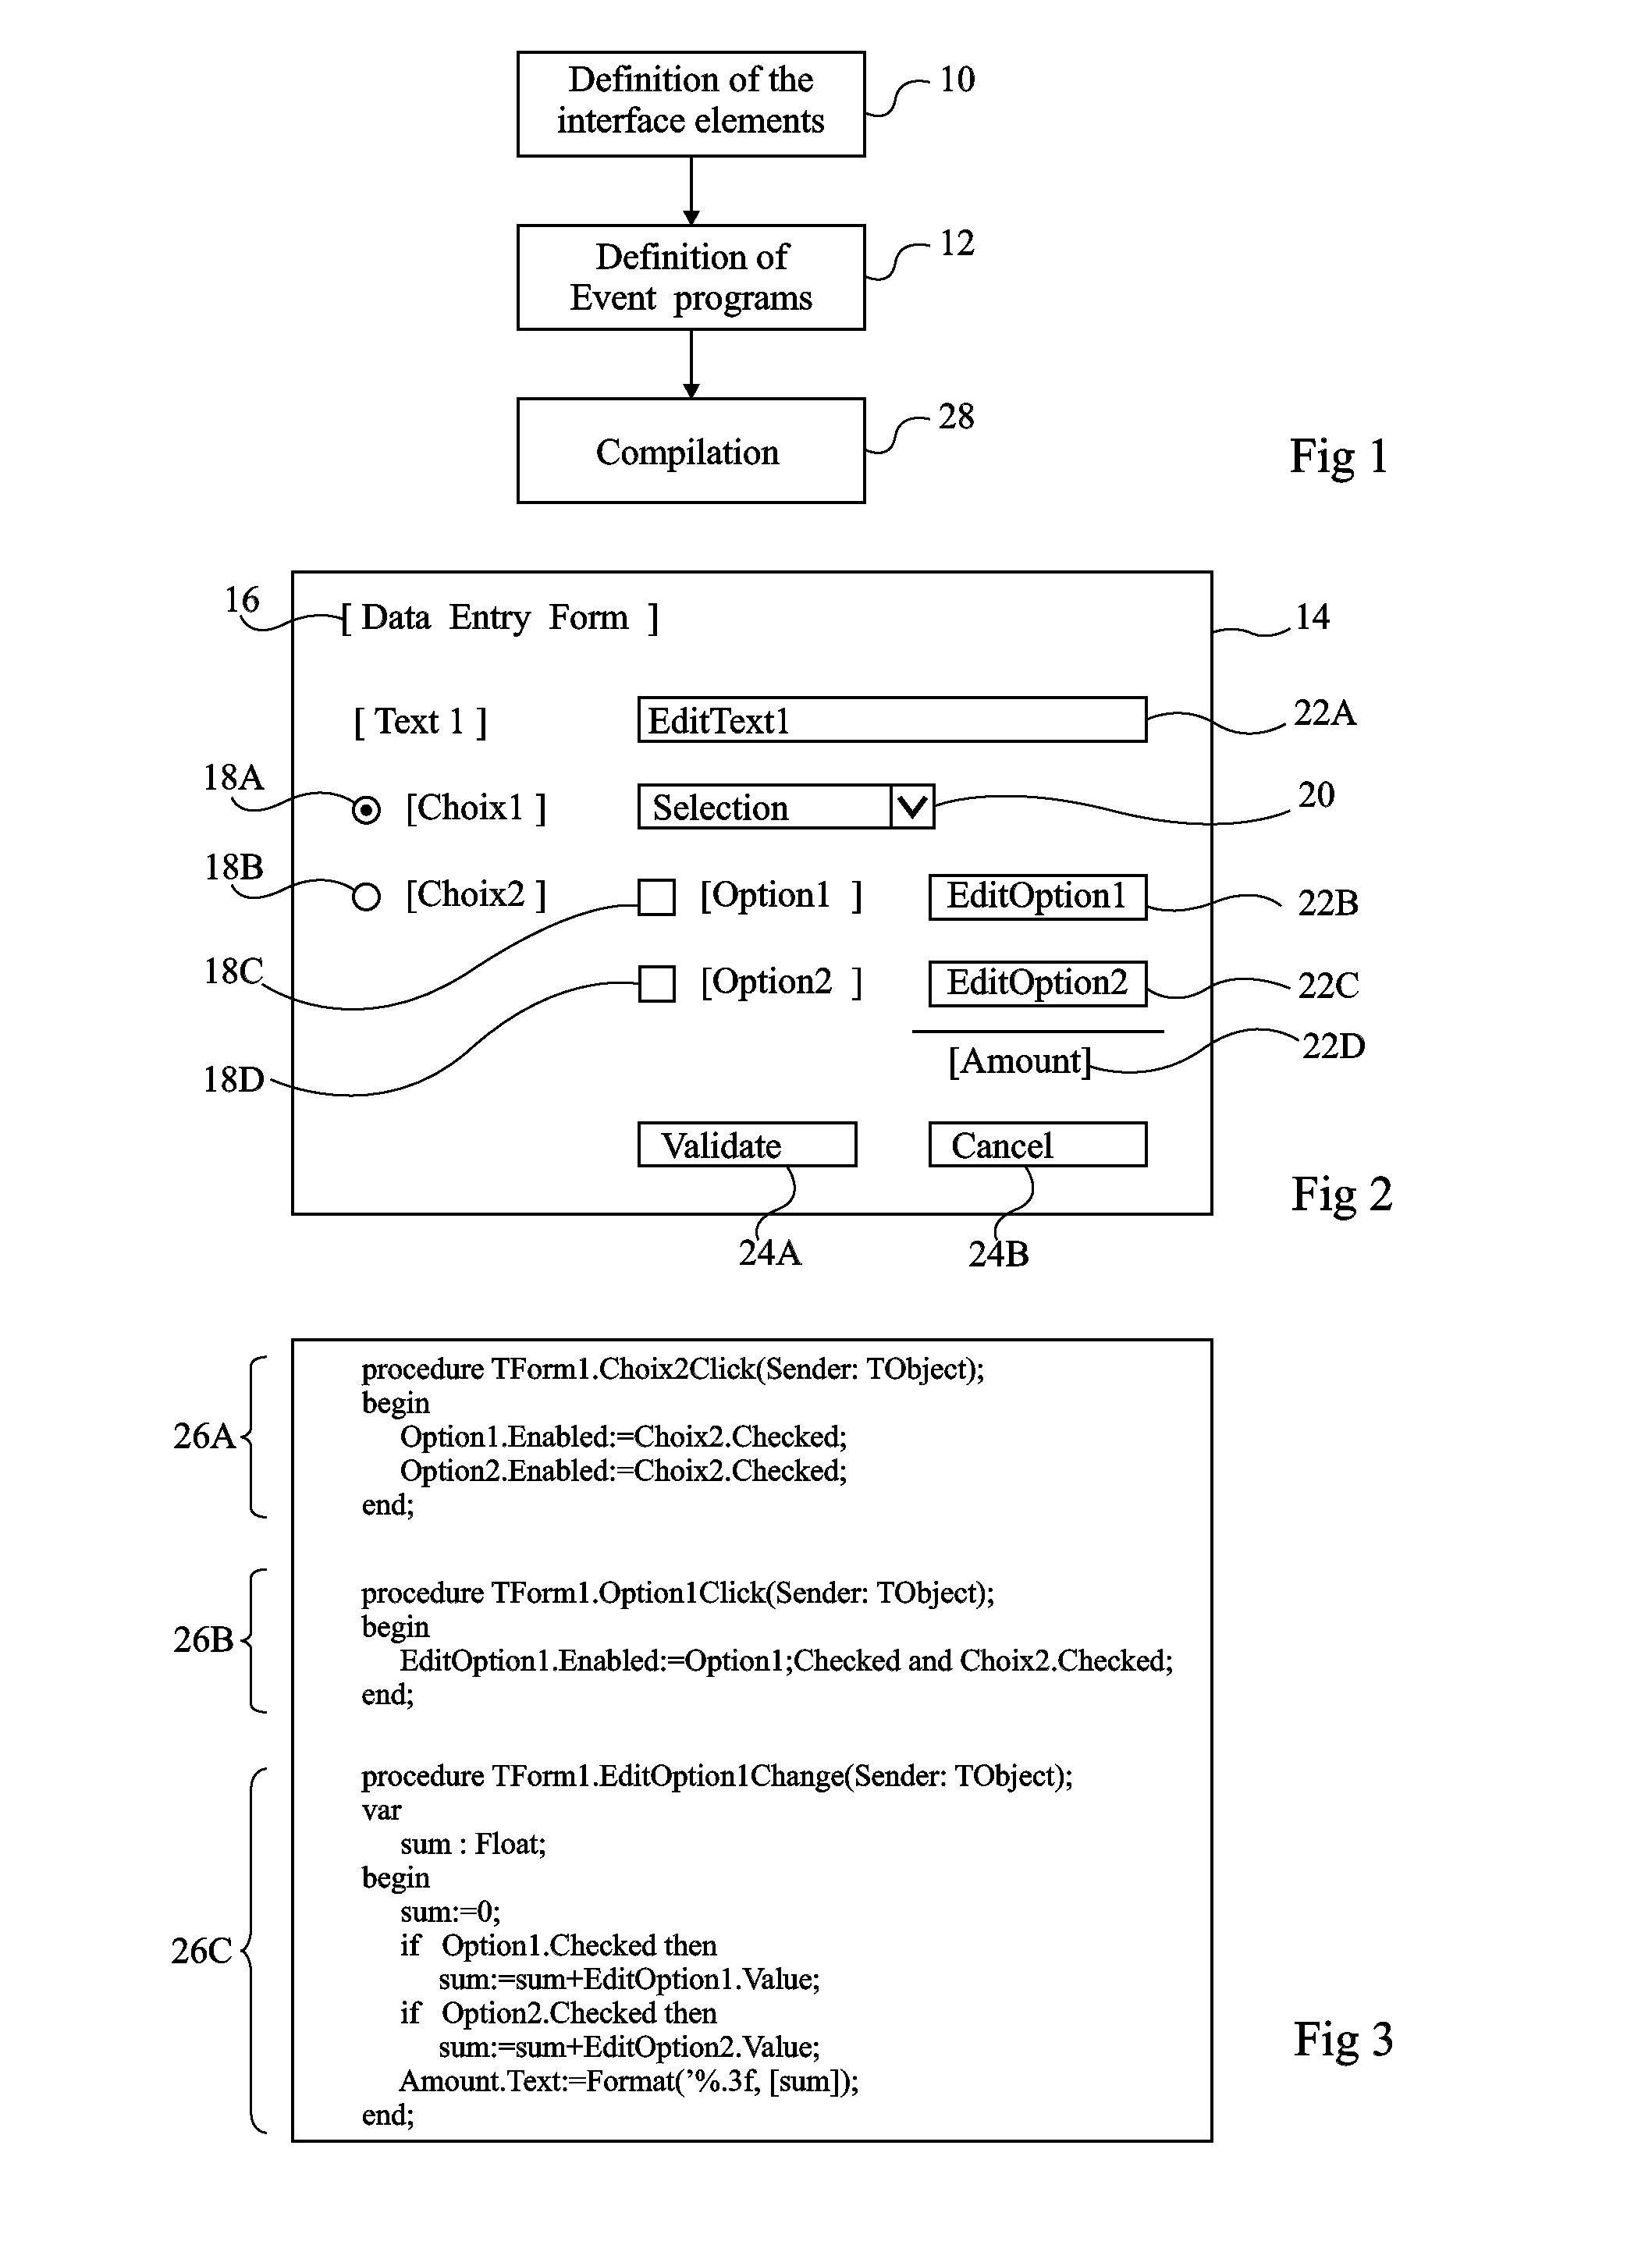 Method for designing a graphical interface program